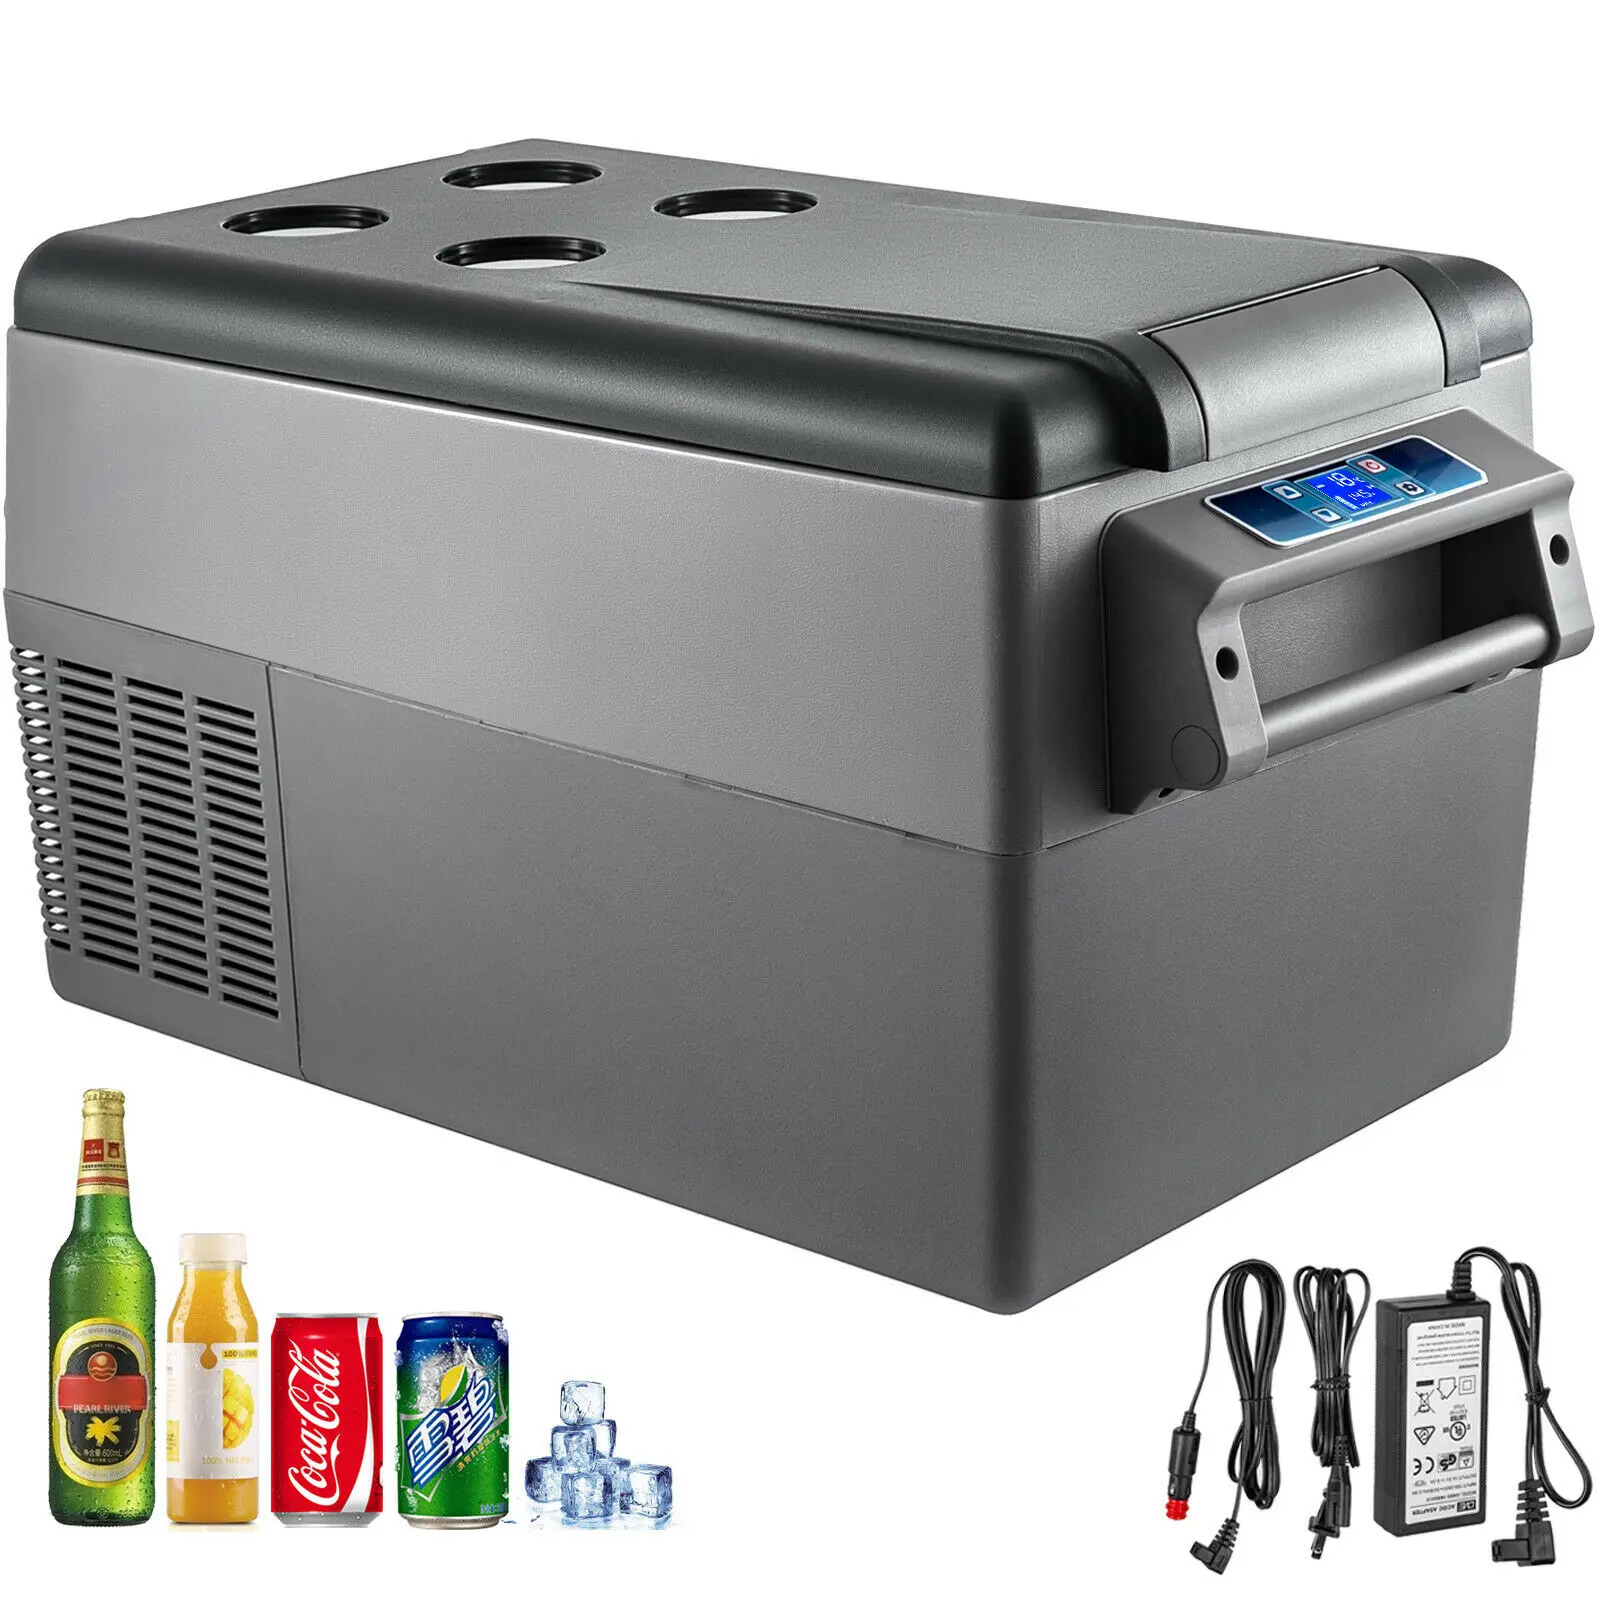 35L VEVOR Car Refrigerator Compressor Portable Small Refrigerator Car Refrigerator Freezer Vehicle Car Truck RV Boat Mini Electric Cooler for Driving Travel Fishing Outdoor and Home Use 